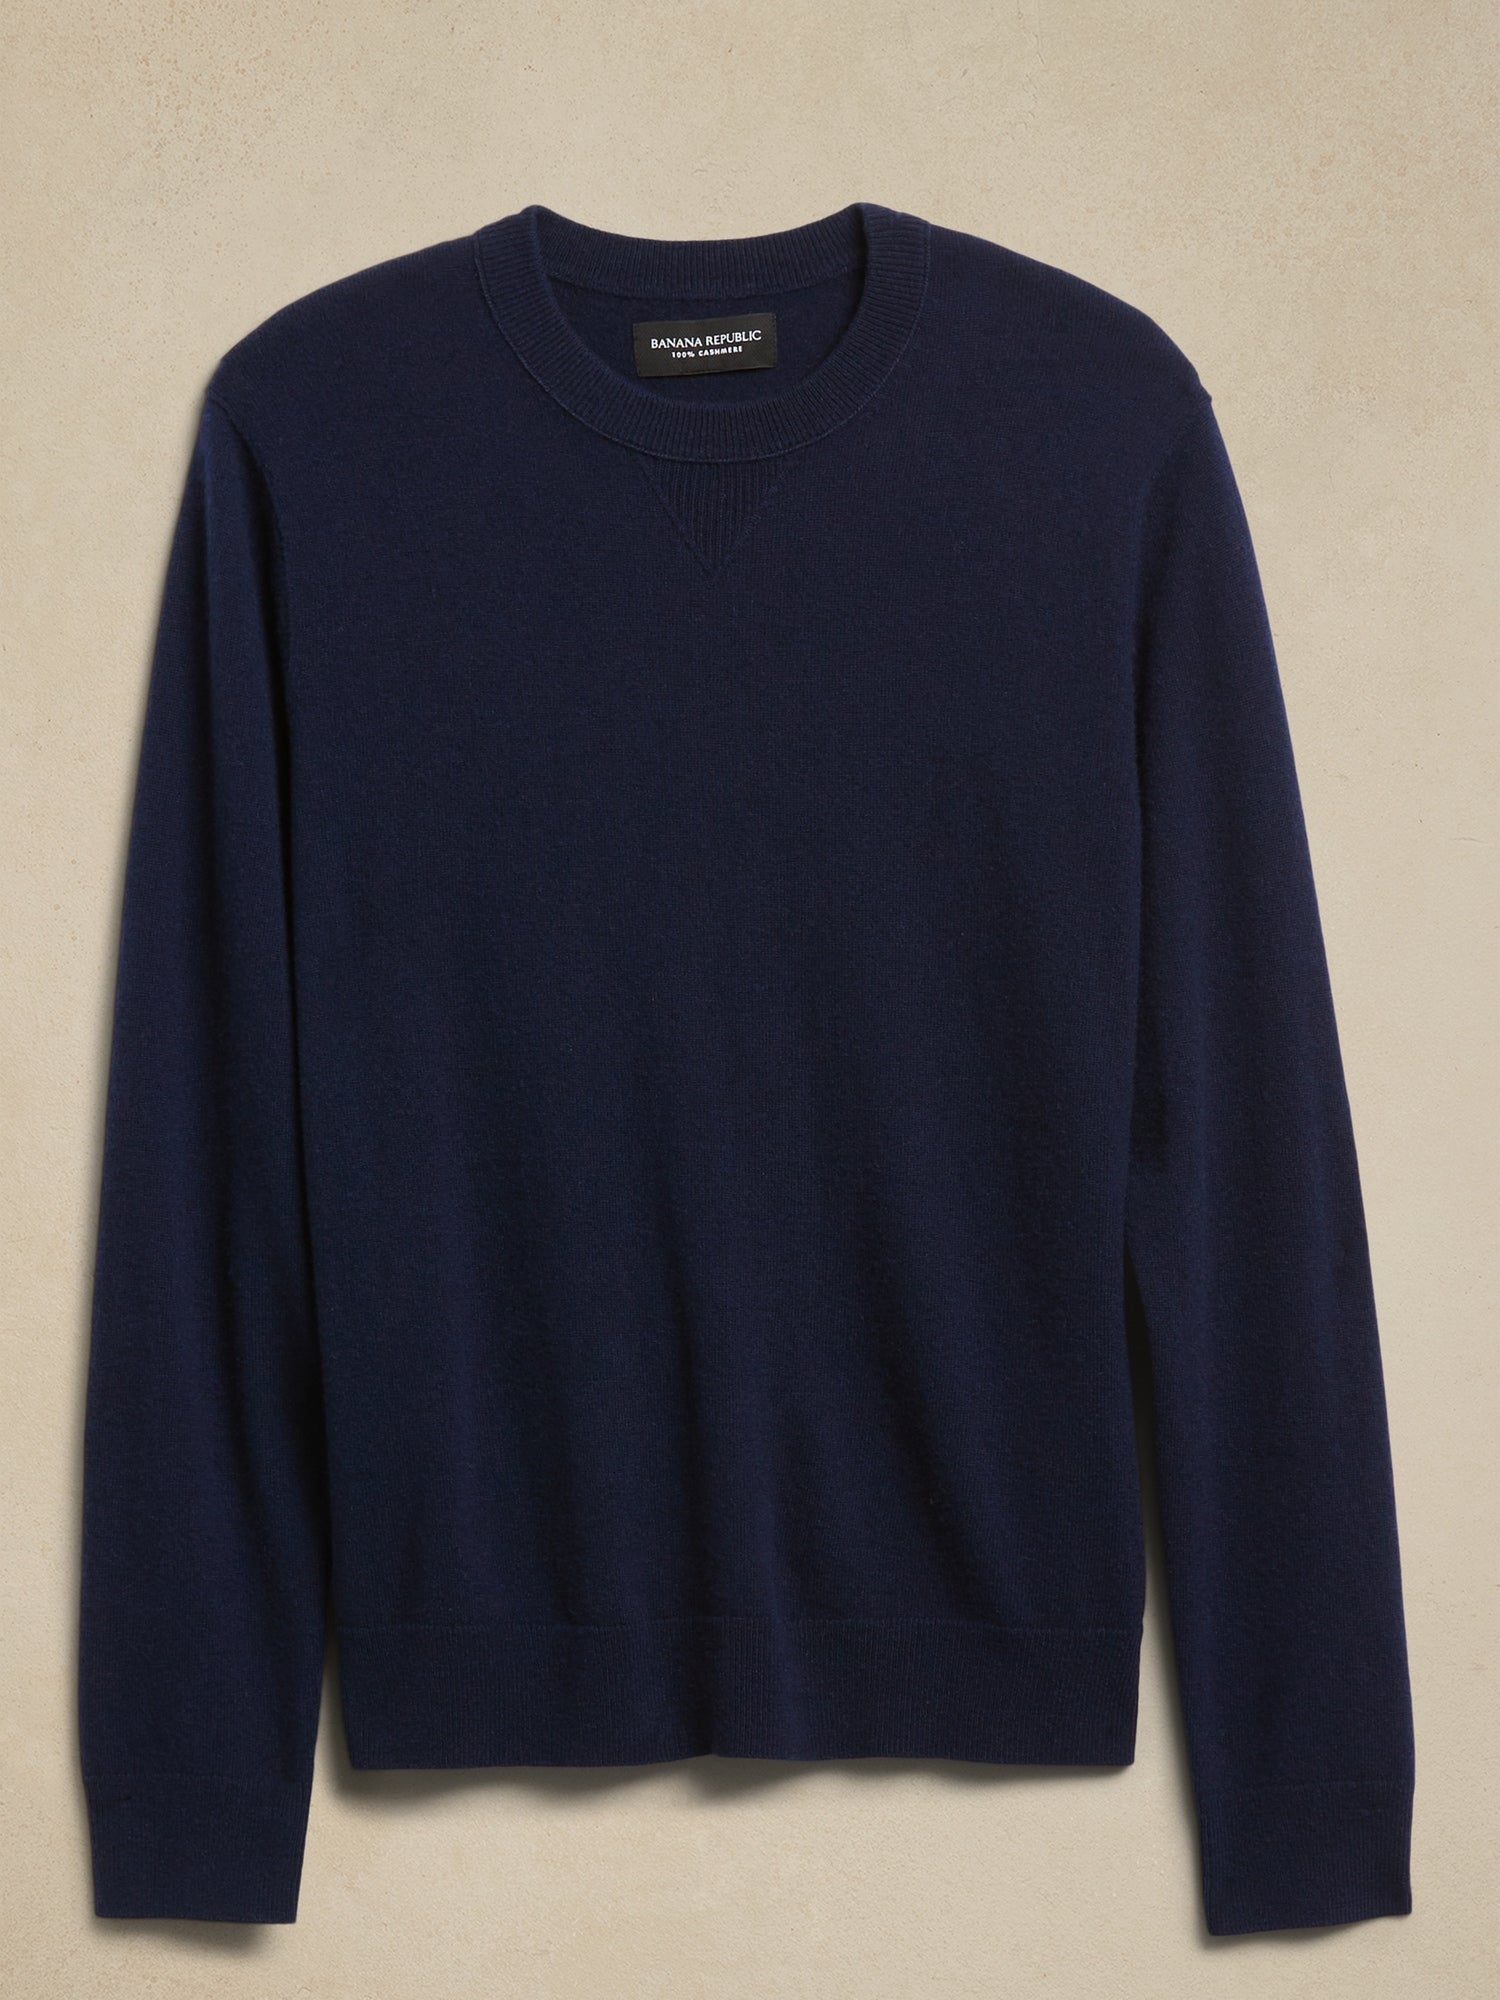 Are Banana Republic Sweaters Good Quality?